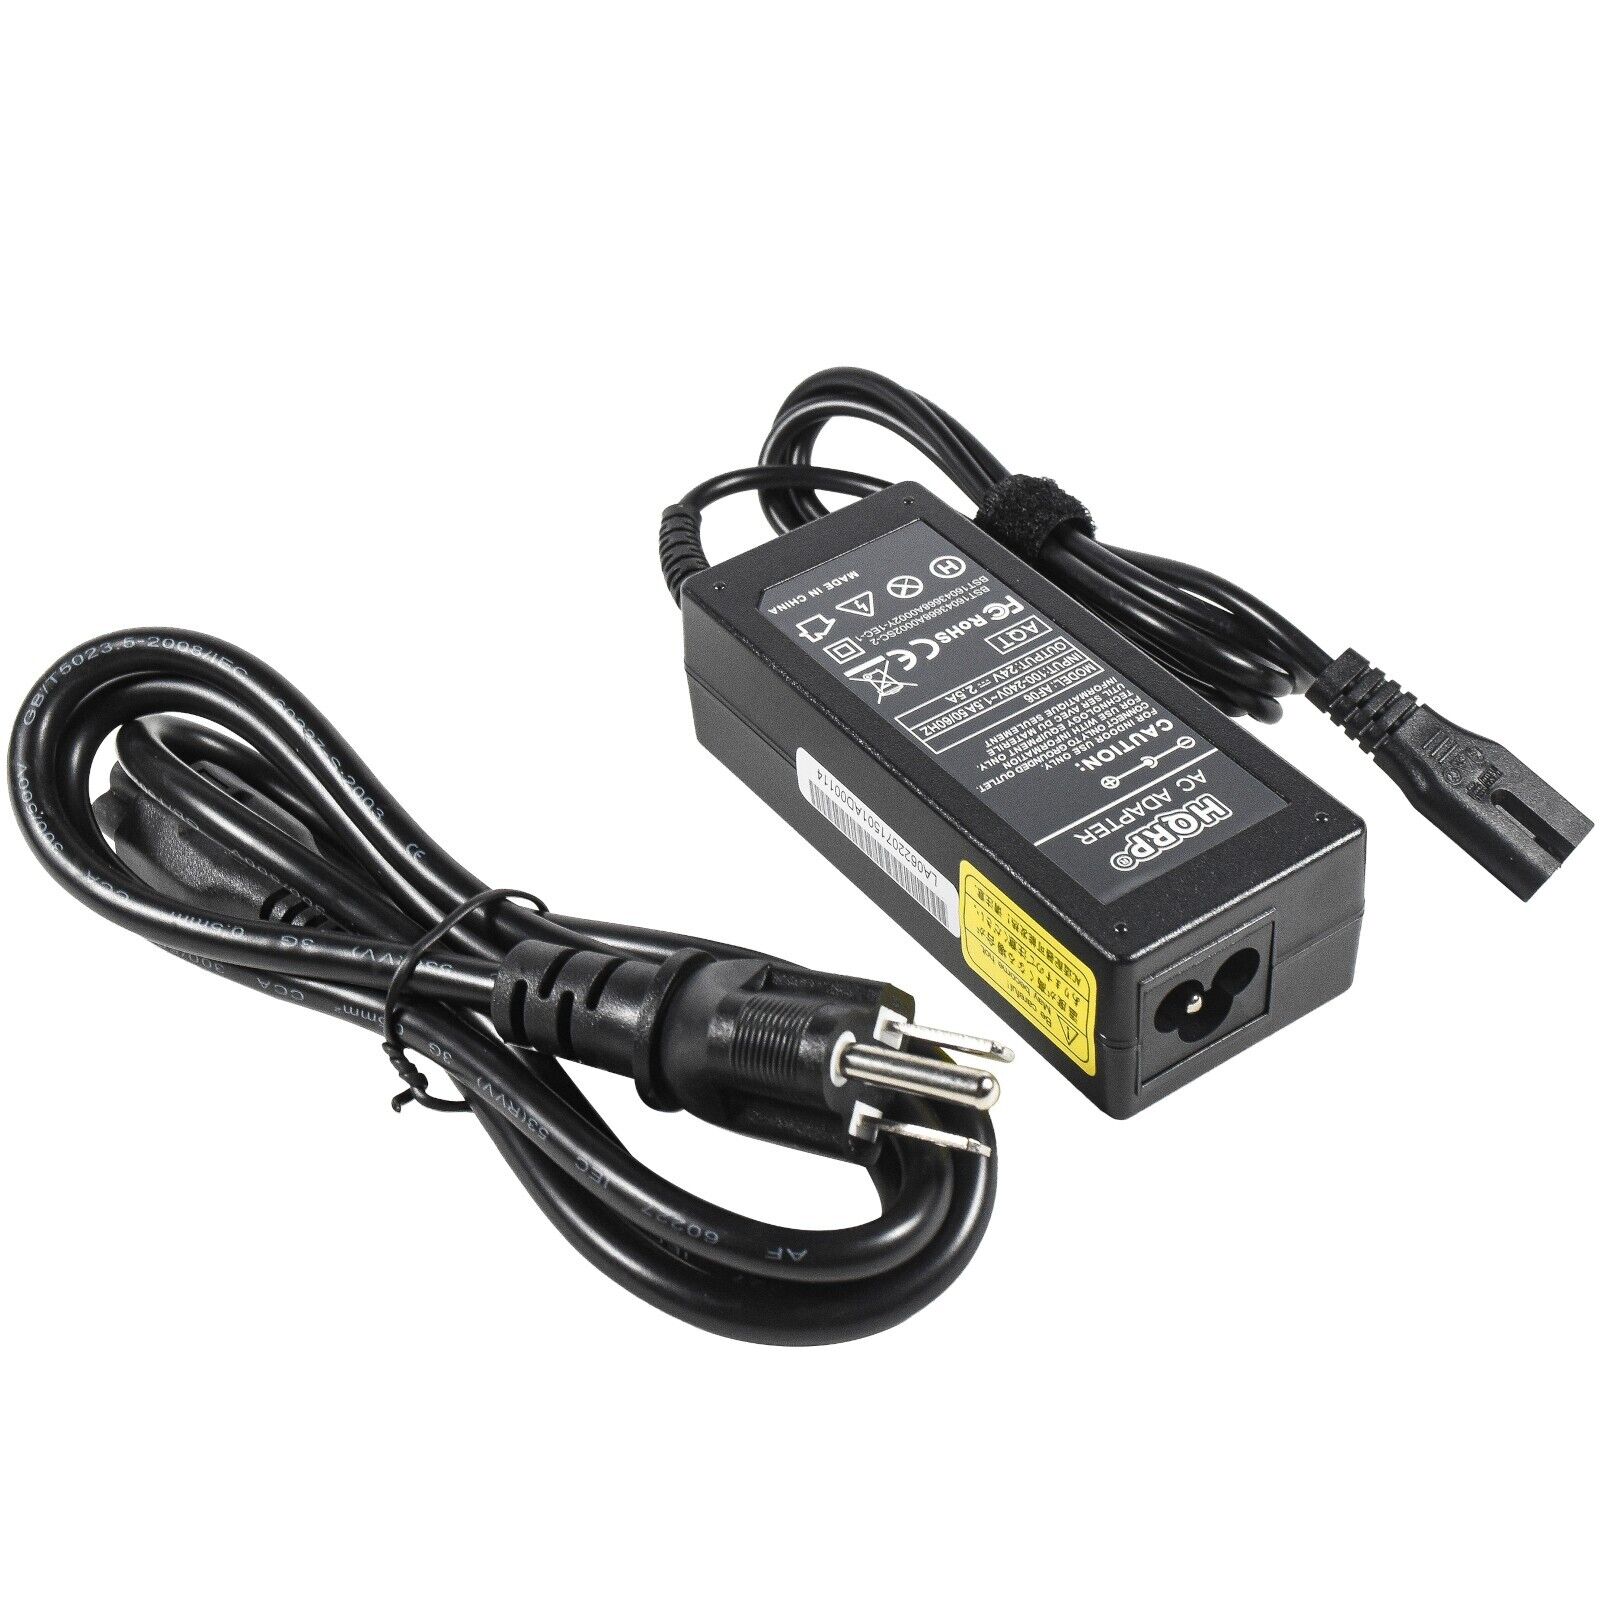 *Brand NEW* UComfy 8072 8954 9209 4A201201 YH-3318G Massagers DC 24V, 2.5A AC Adapter